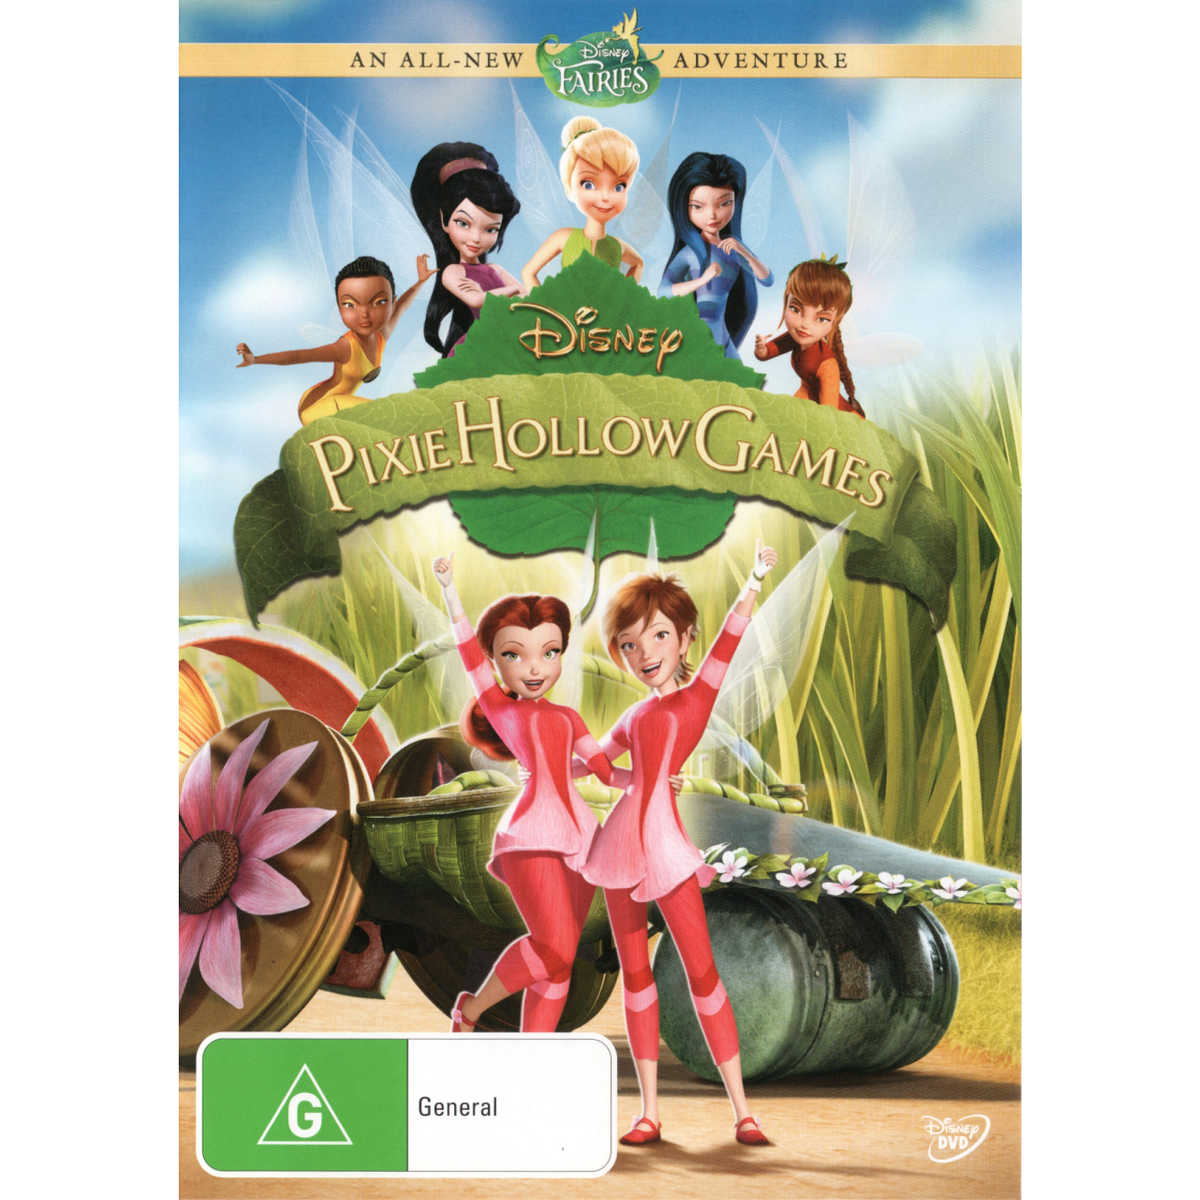 Pixie Hollow Games #9